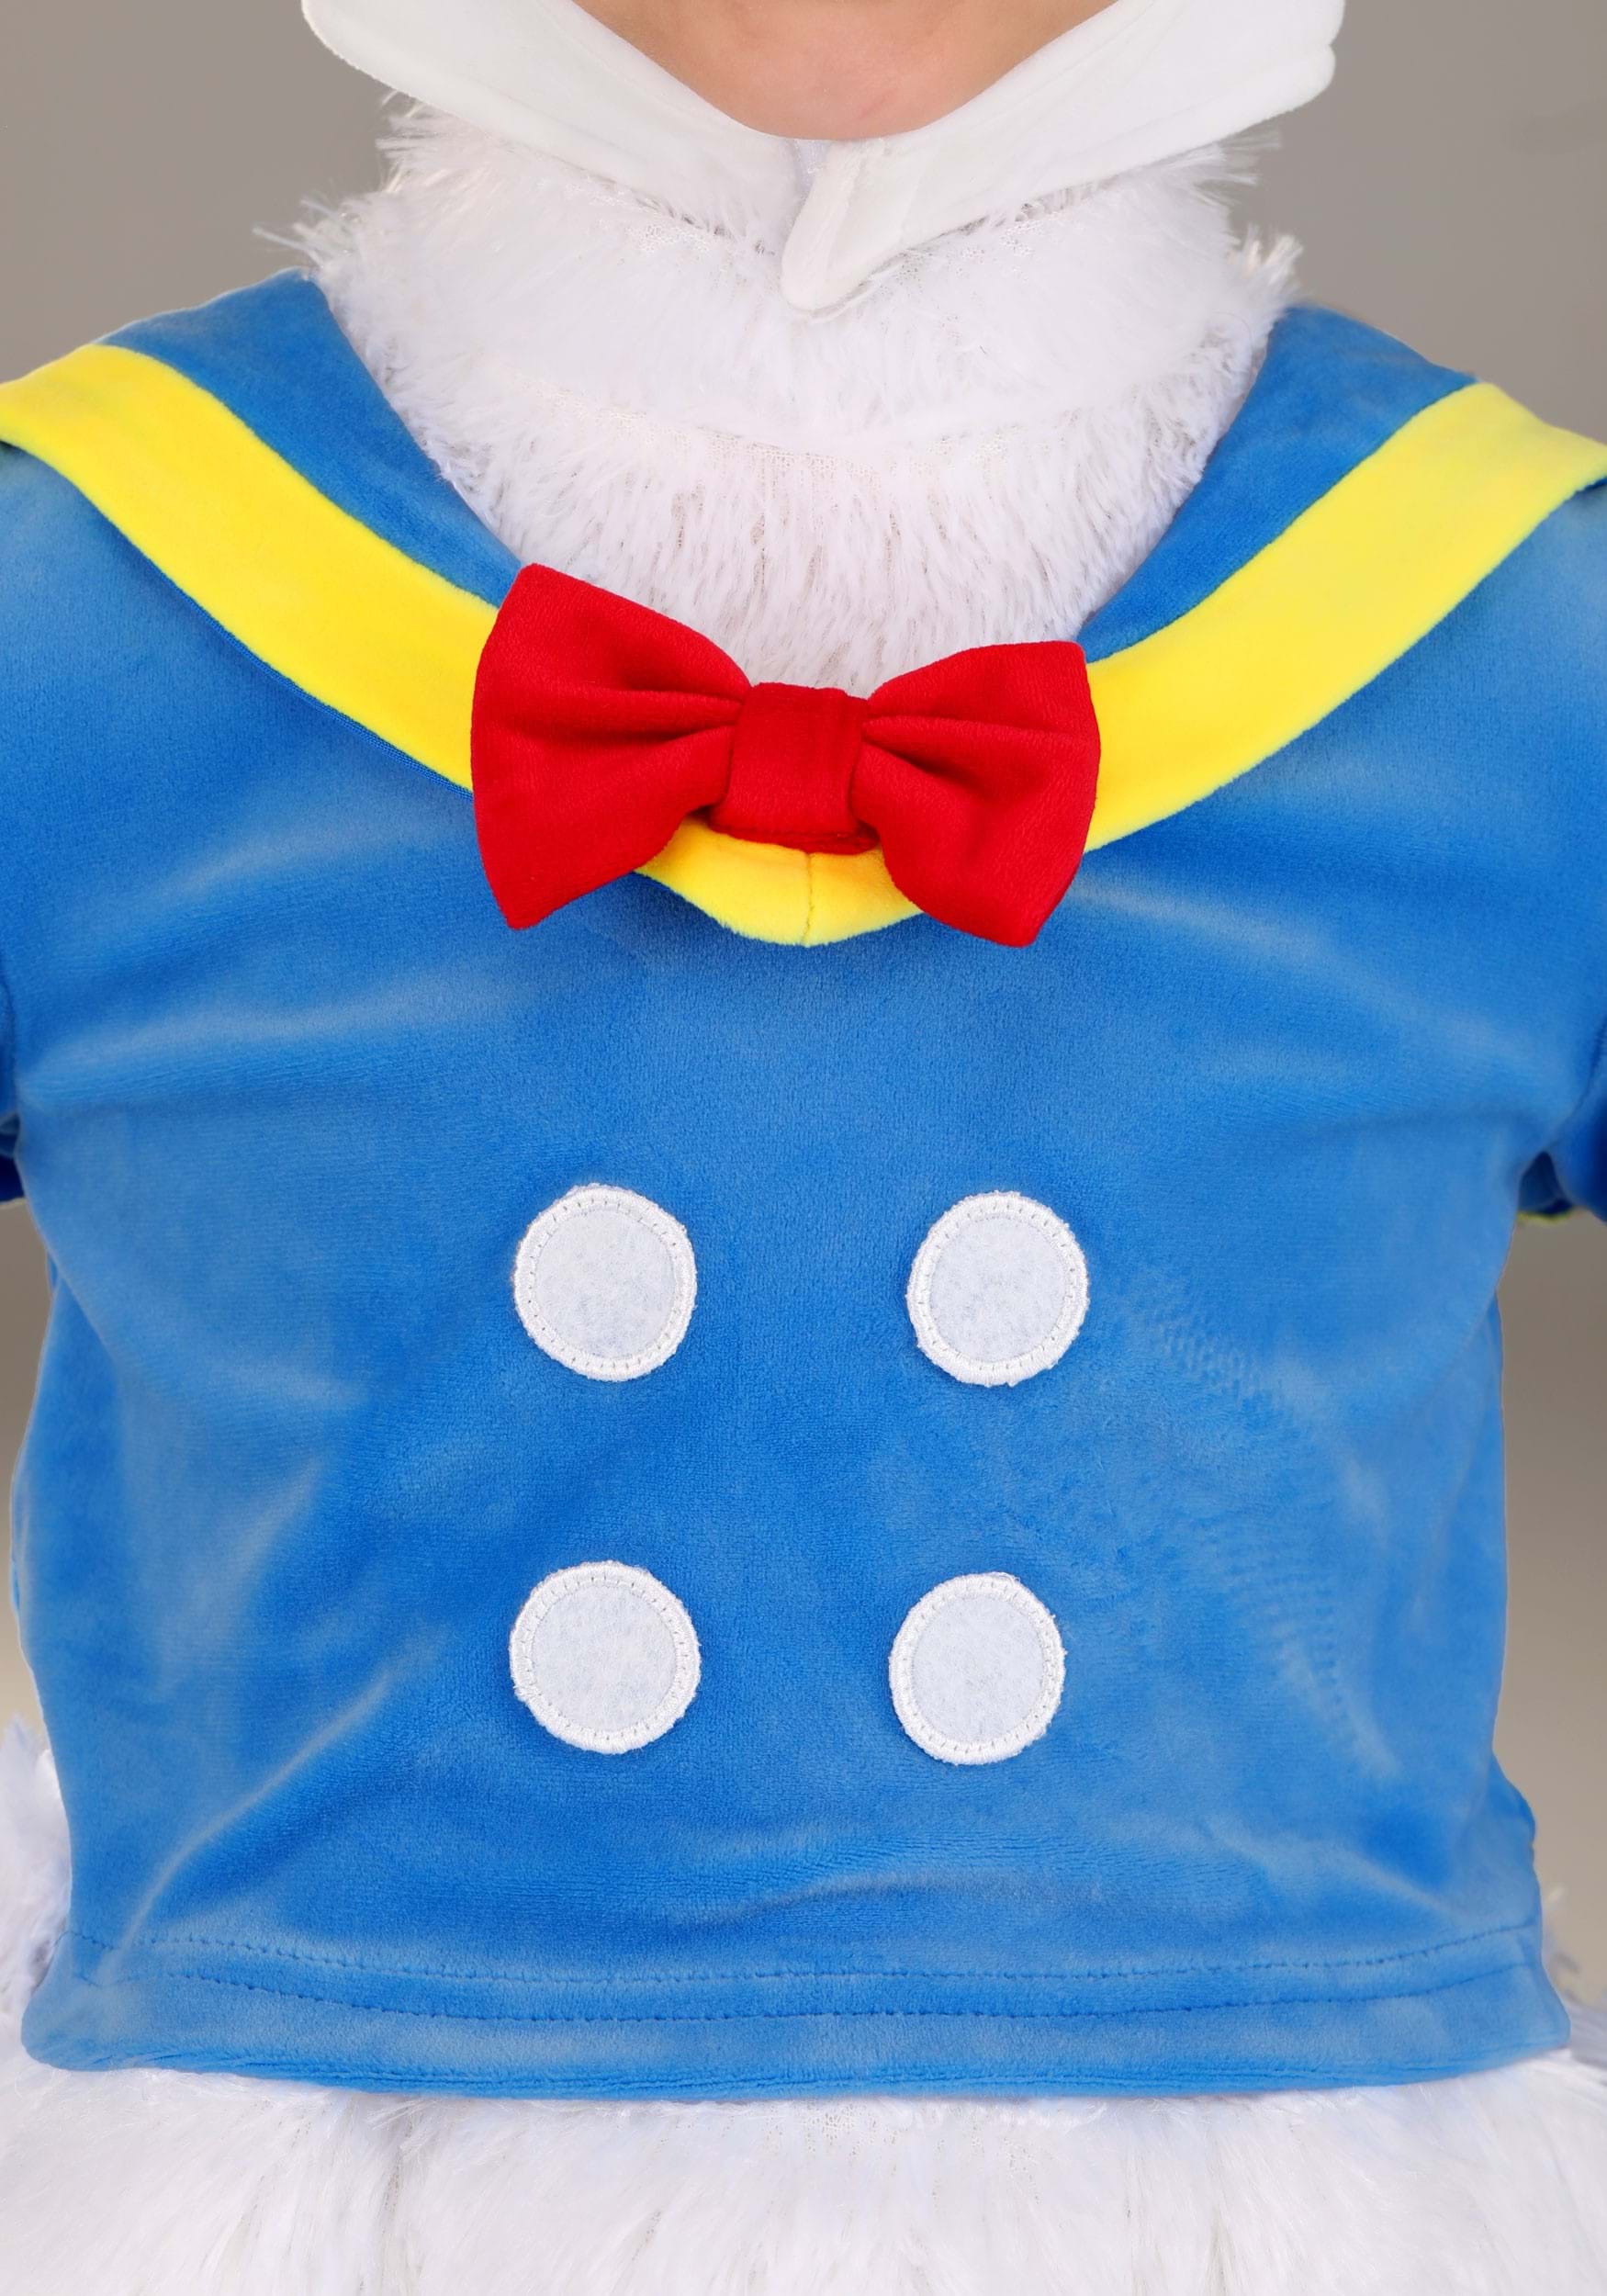 Toddler Donald Duck Costume